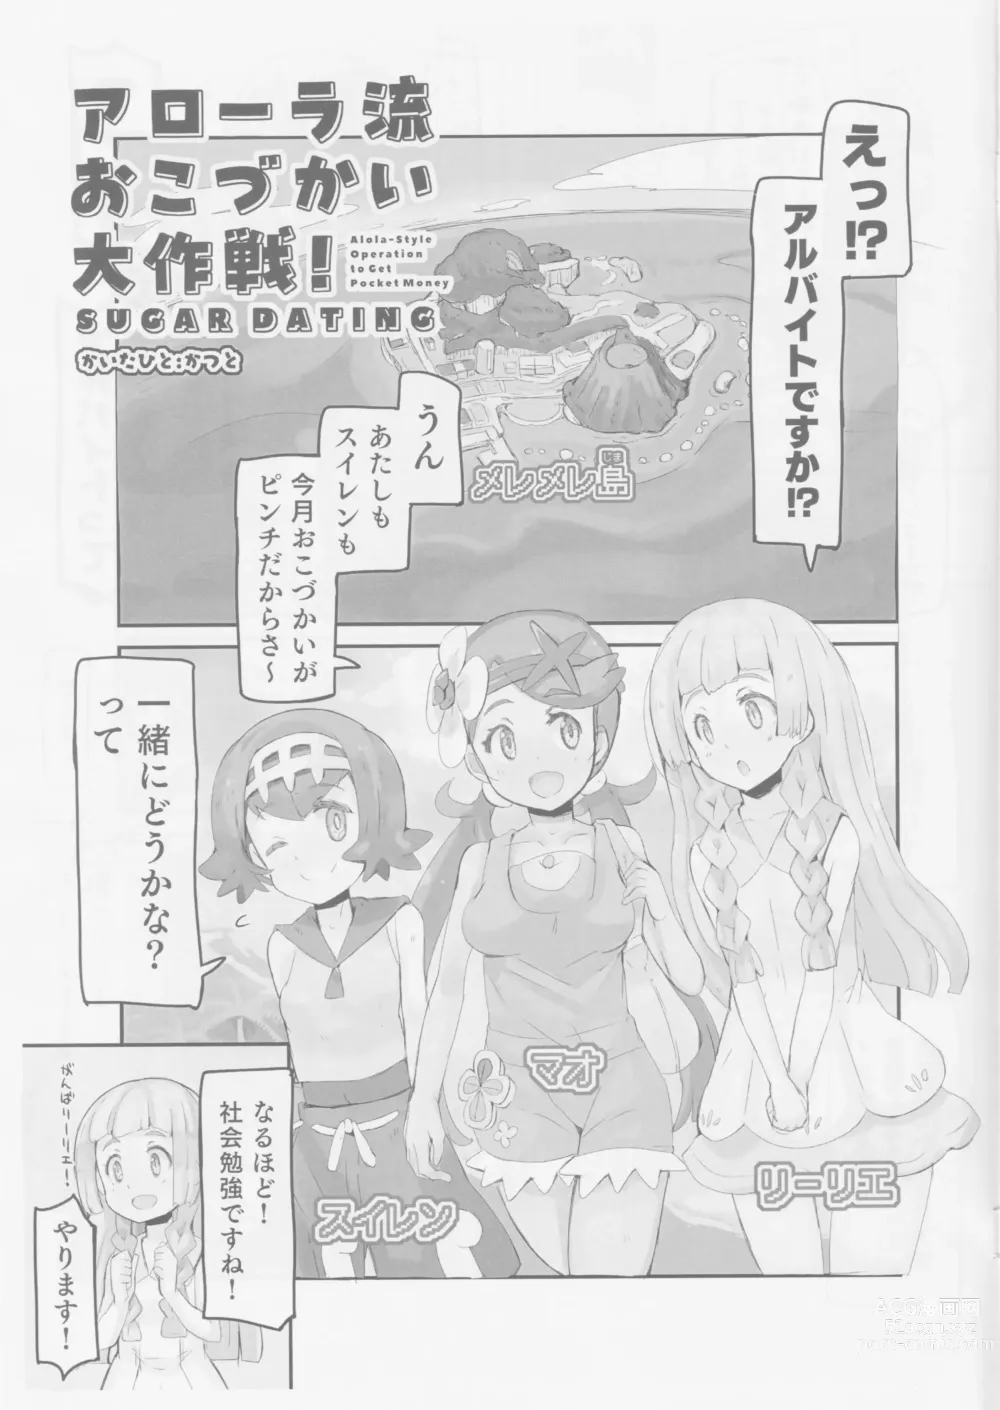 Page 5 of doujinshi Aloha Style Operation to get Pocket Money - Sugar Dating